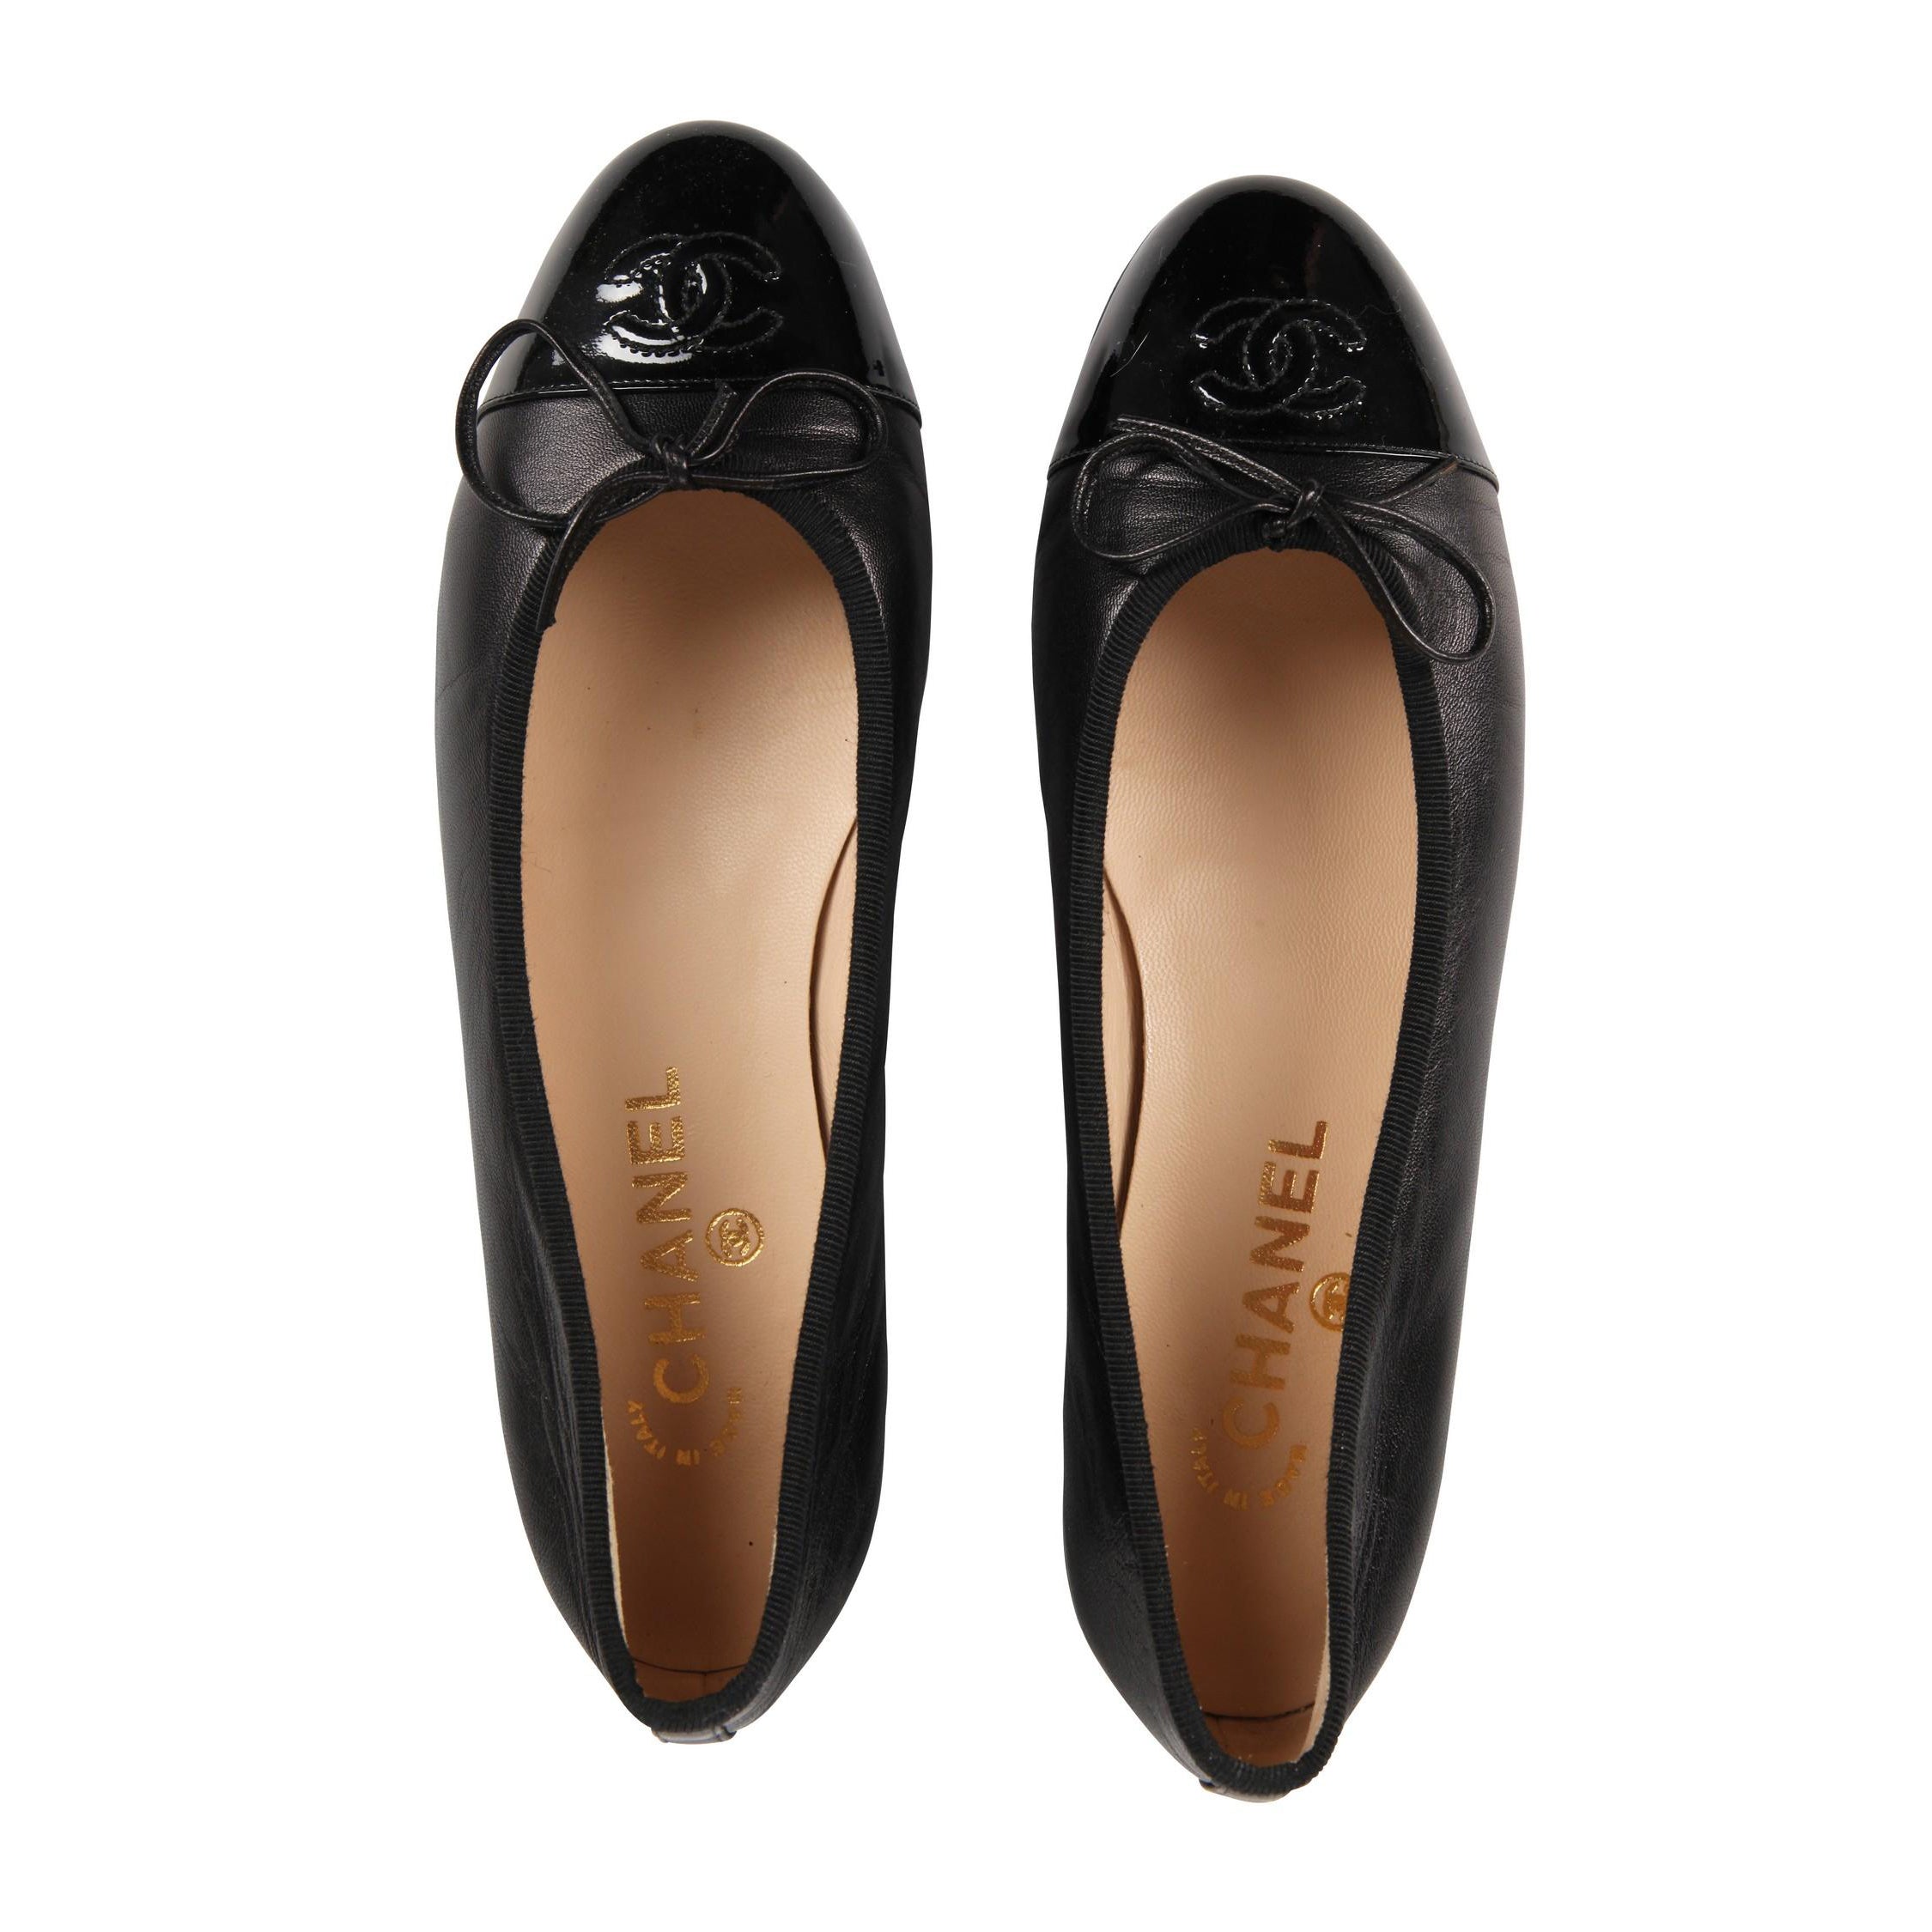 Leather ballet flats Chanel Black size 39.5 EU in Leather - 34304423